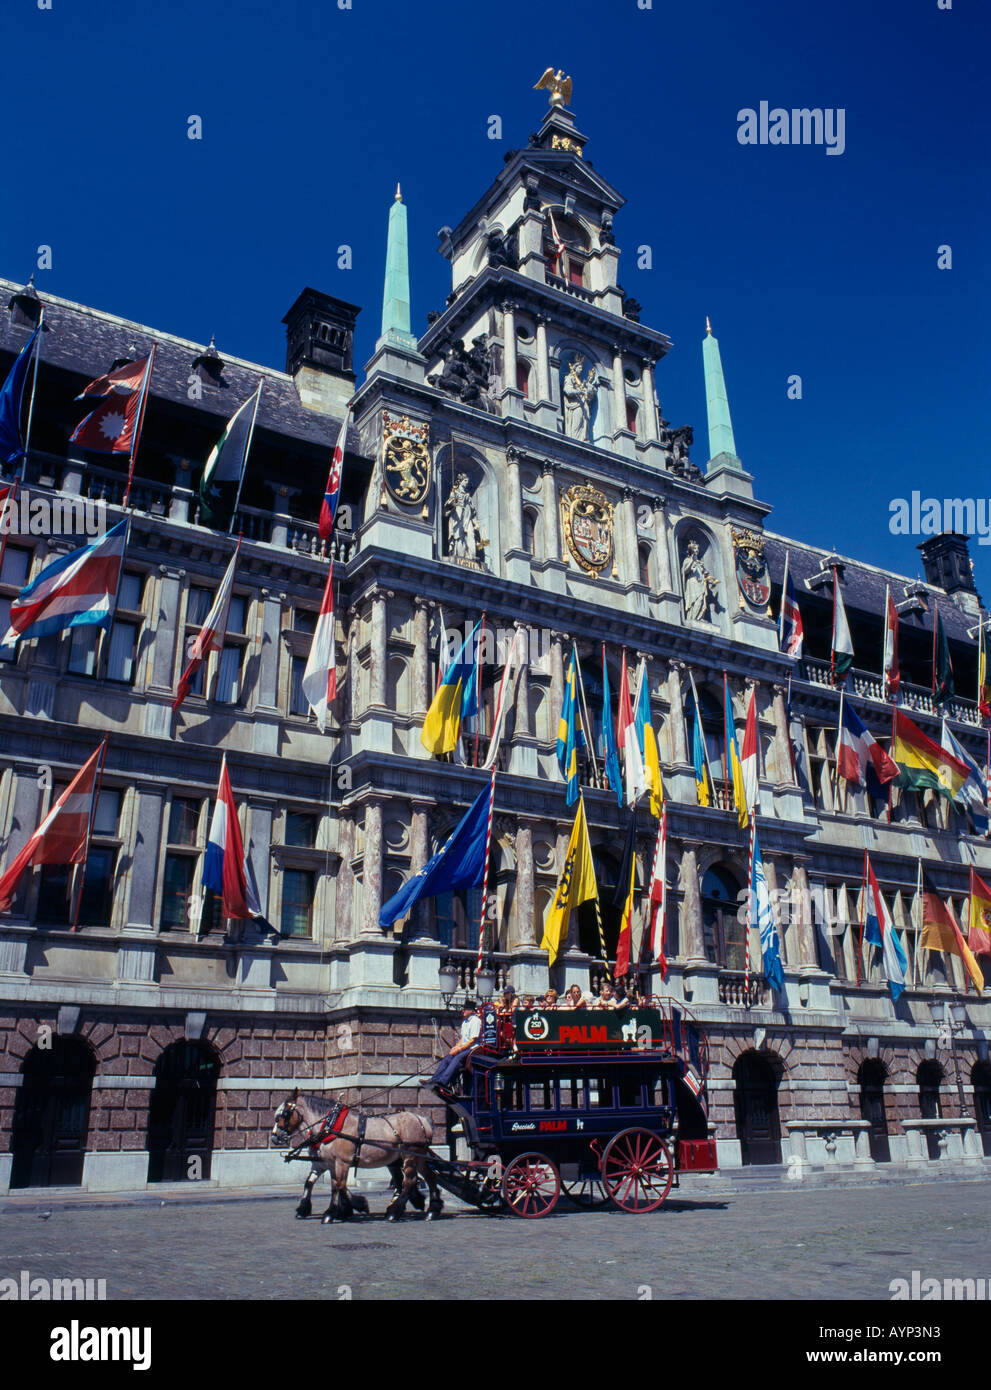 Belgium, Flemish Region, Antwerp.  Horse drawn tourist coach in front of the Town Hall which is covered in flags. Stock Photo